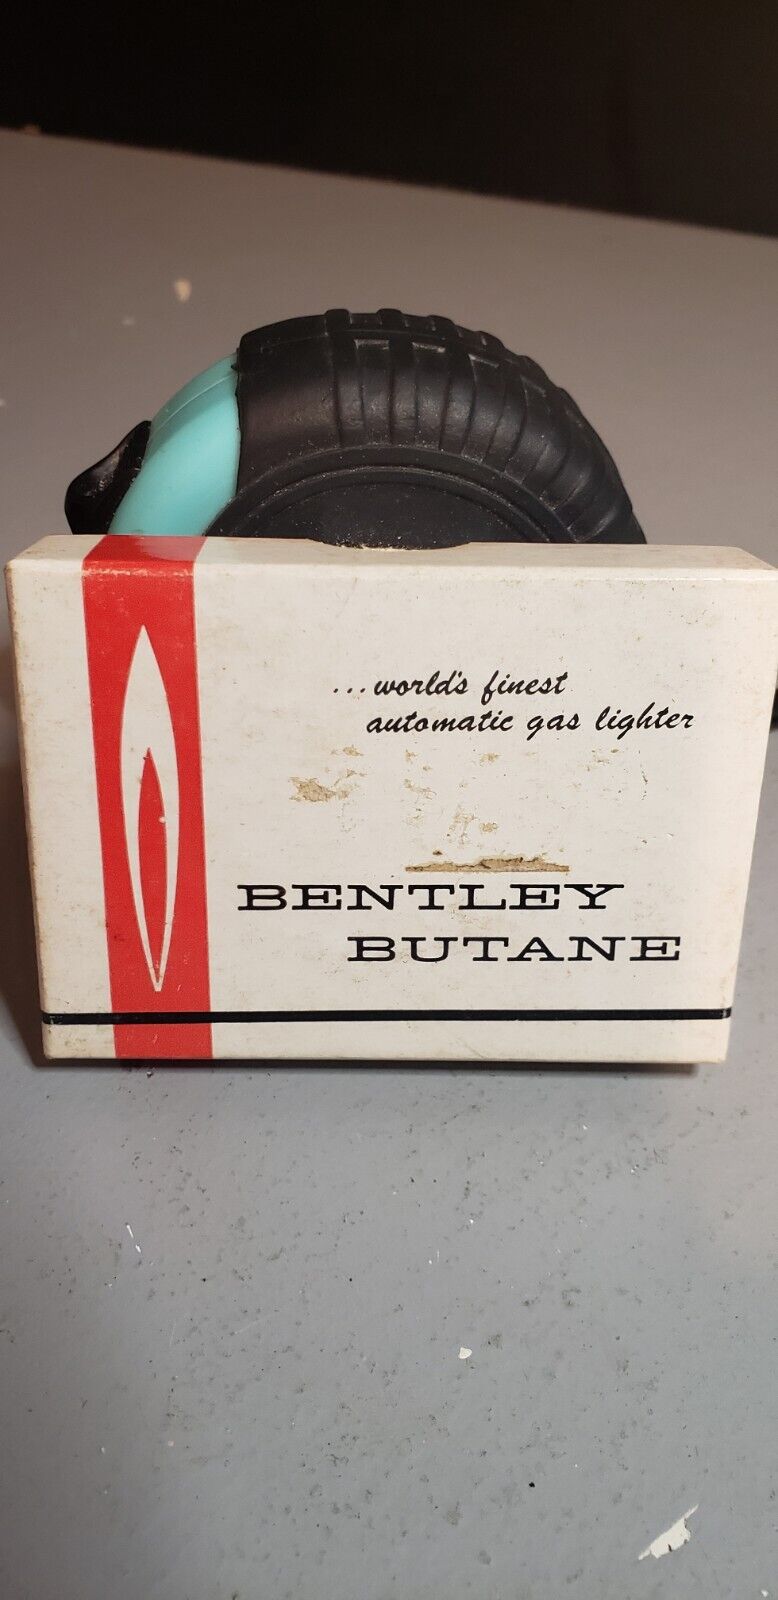 Bentley Butane Lighter in original box, Silver, Vintage, Squares, Collectible, Working!